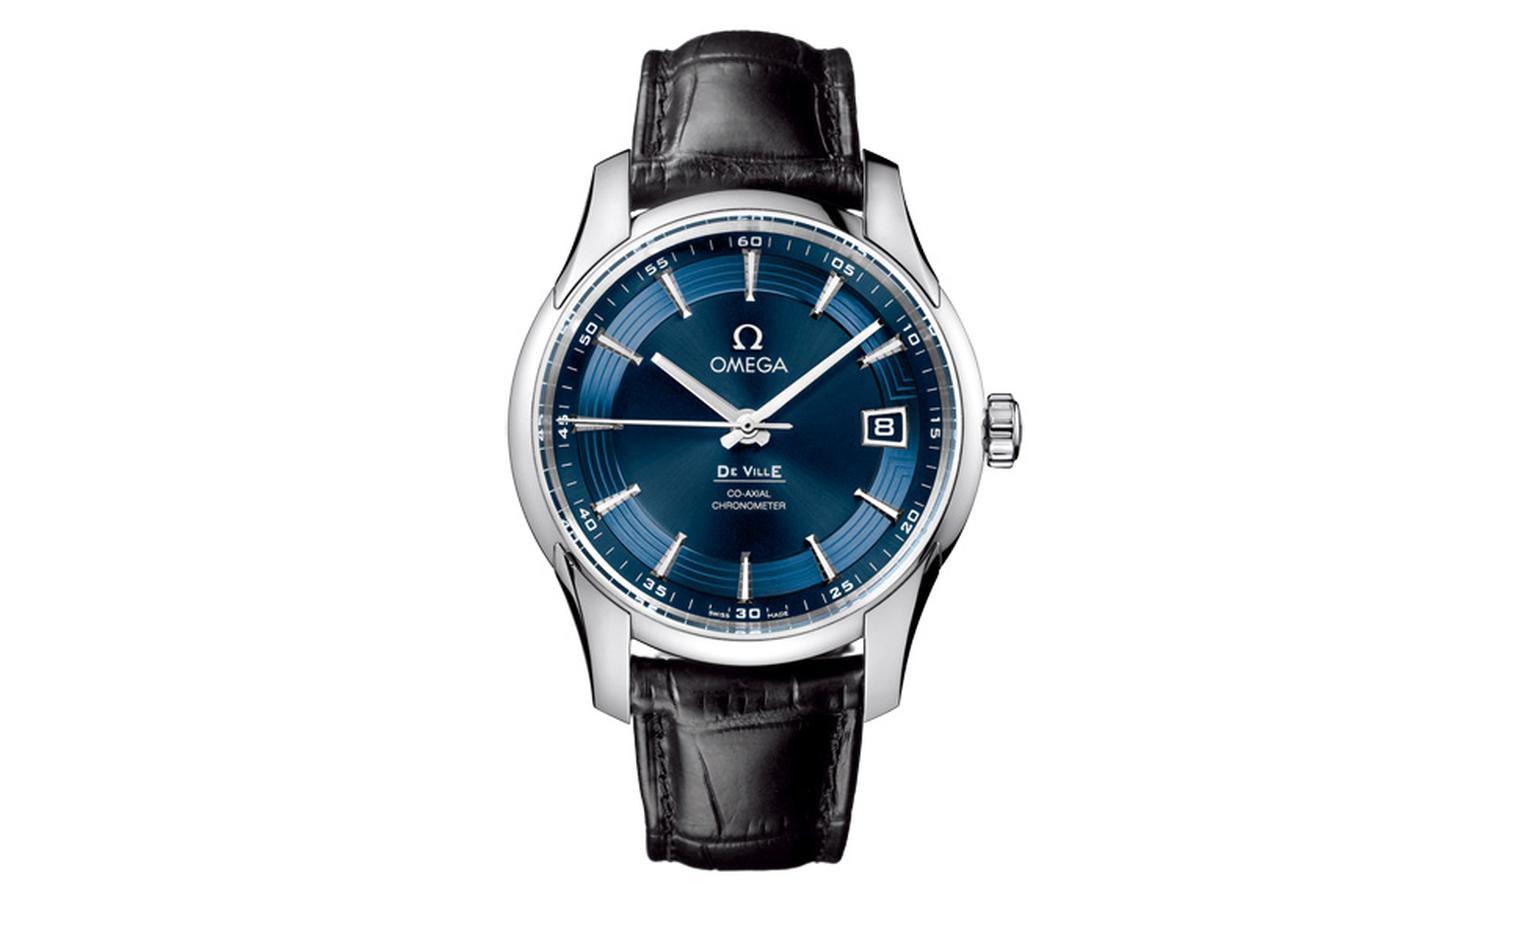 Omega Hour Vision Blue is a limited edition watch linked to the eye charity Orbis and will soon be seen on the wrist of brand ambassador Daniel Craig.